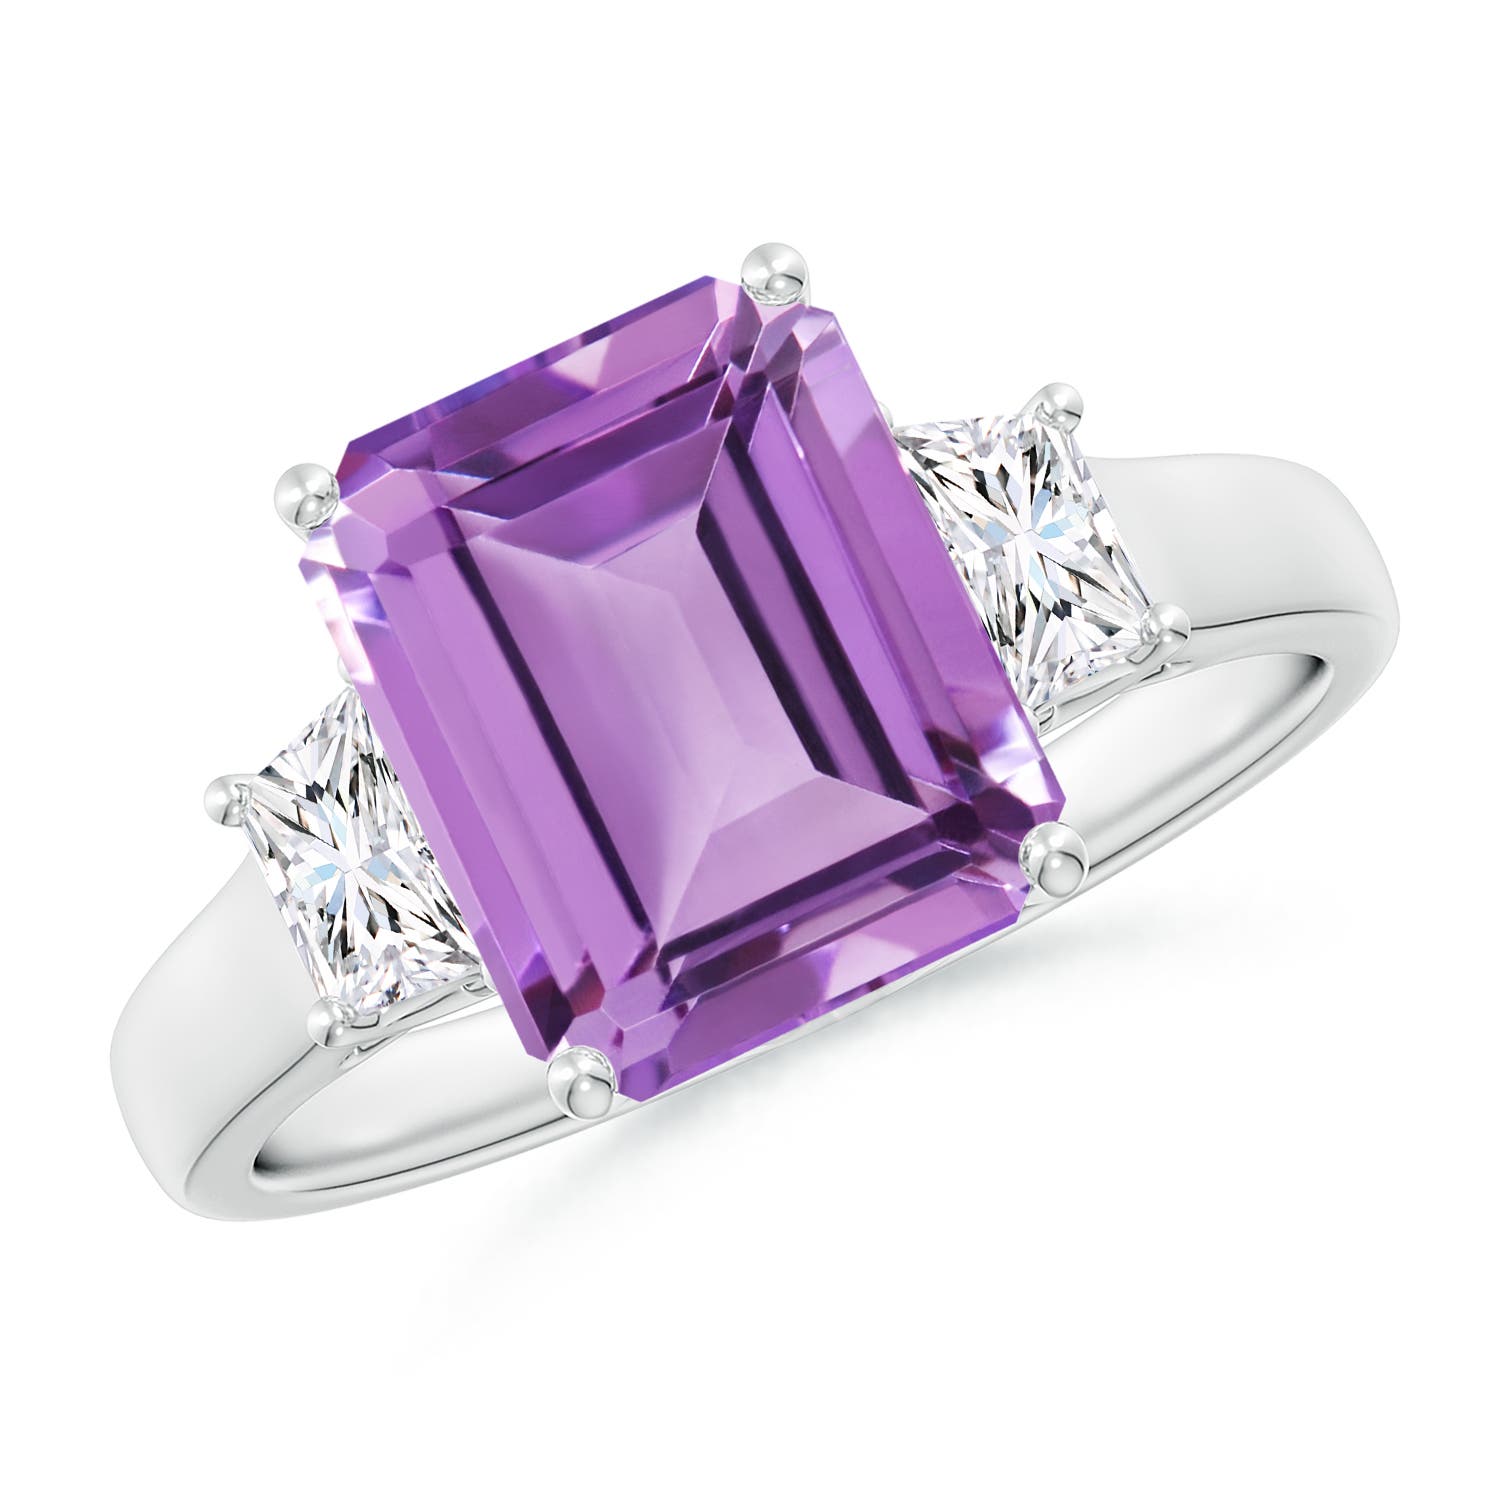 A- Amethyst / 3.22 CT / 14 KT White Gold